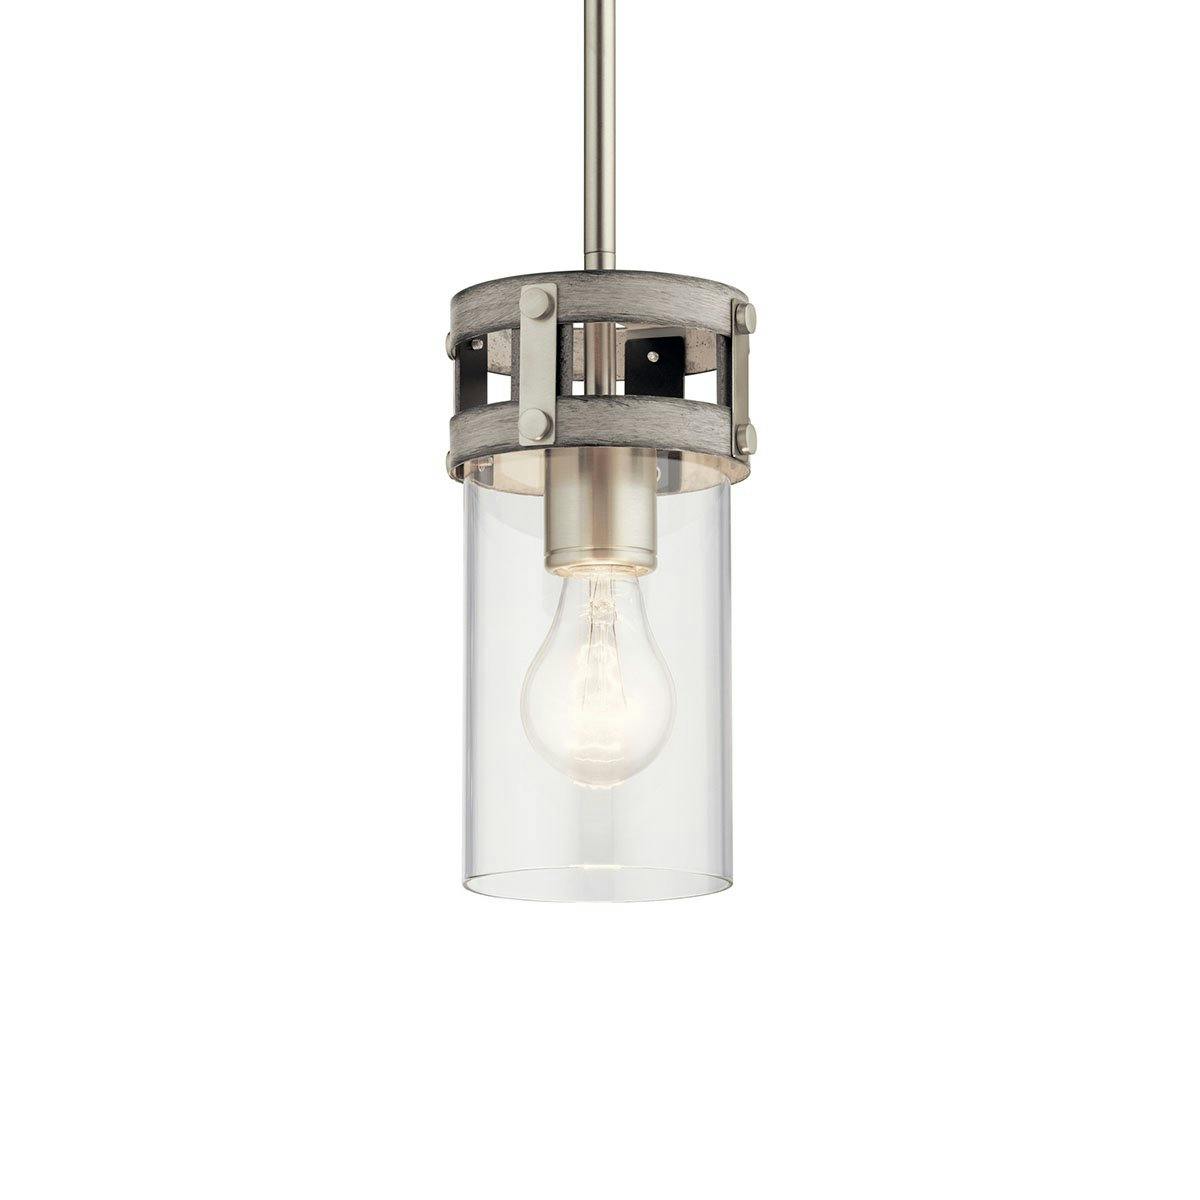 Stetton™ 1 Light Mini Pendant Anvil Iron without the canopy on a white background